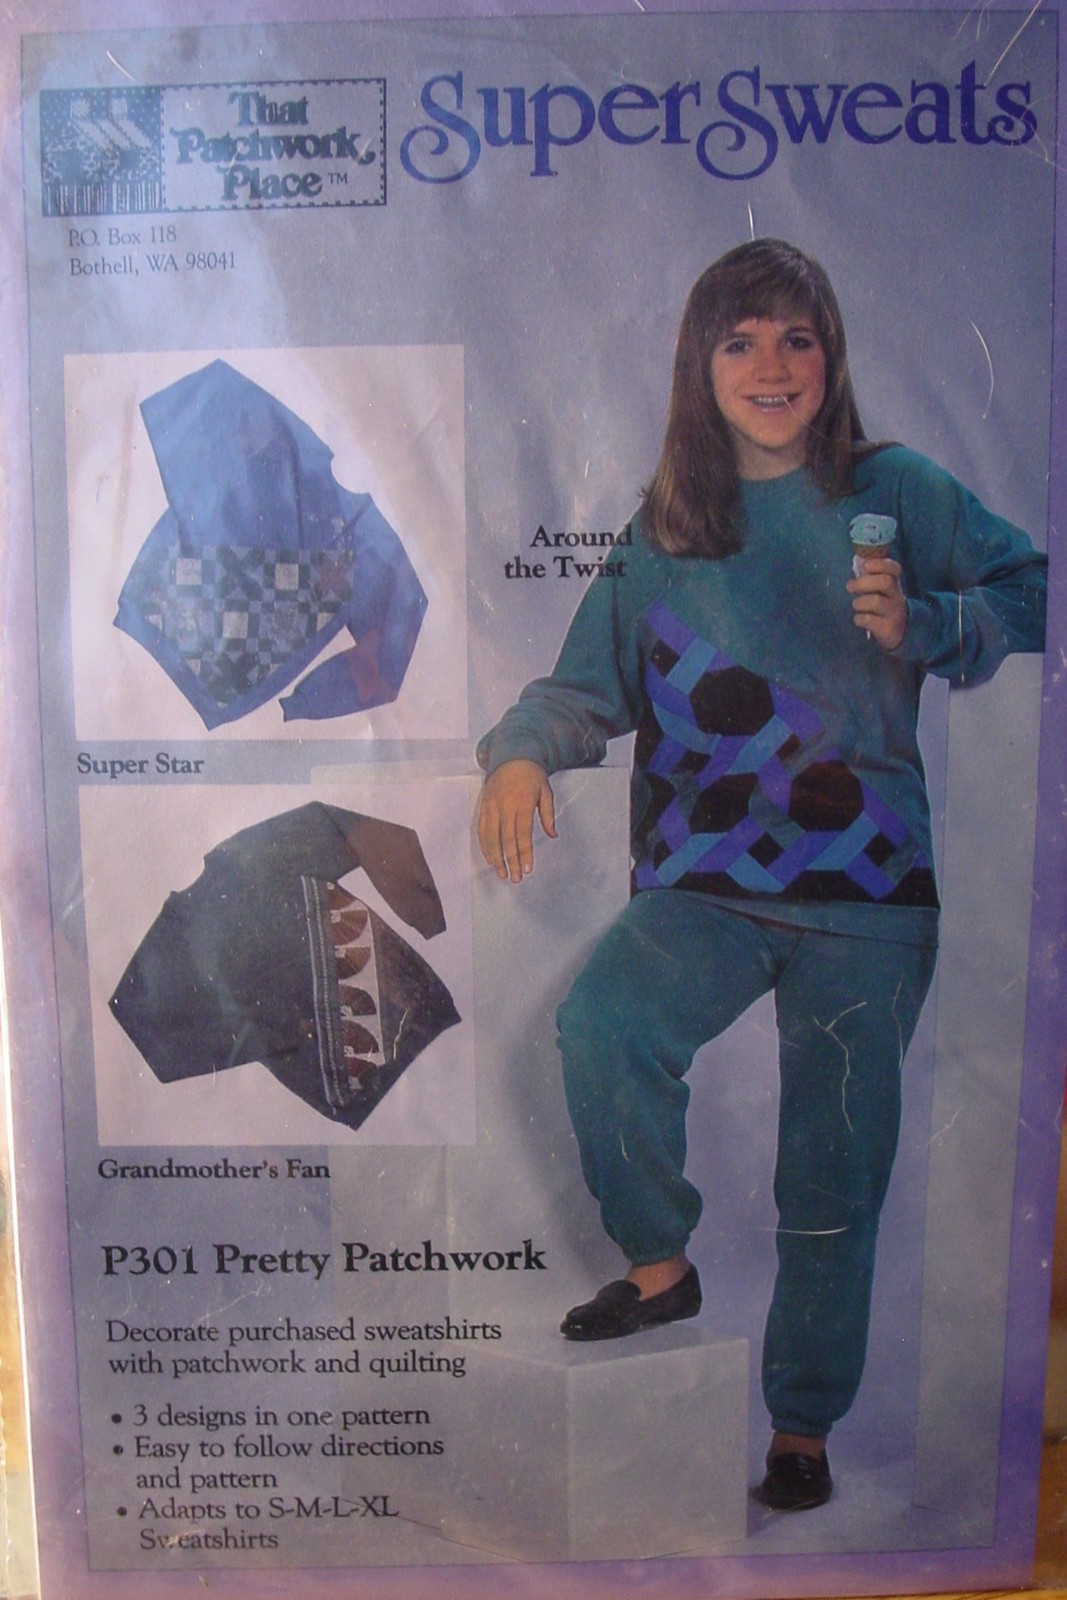 Pattern Designs for Purchased Sweatshirts Used Uncut - $1.99